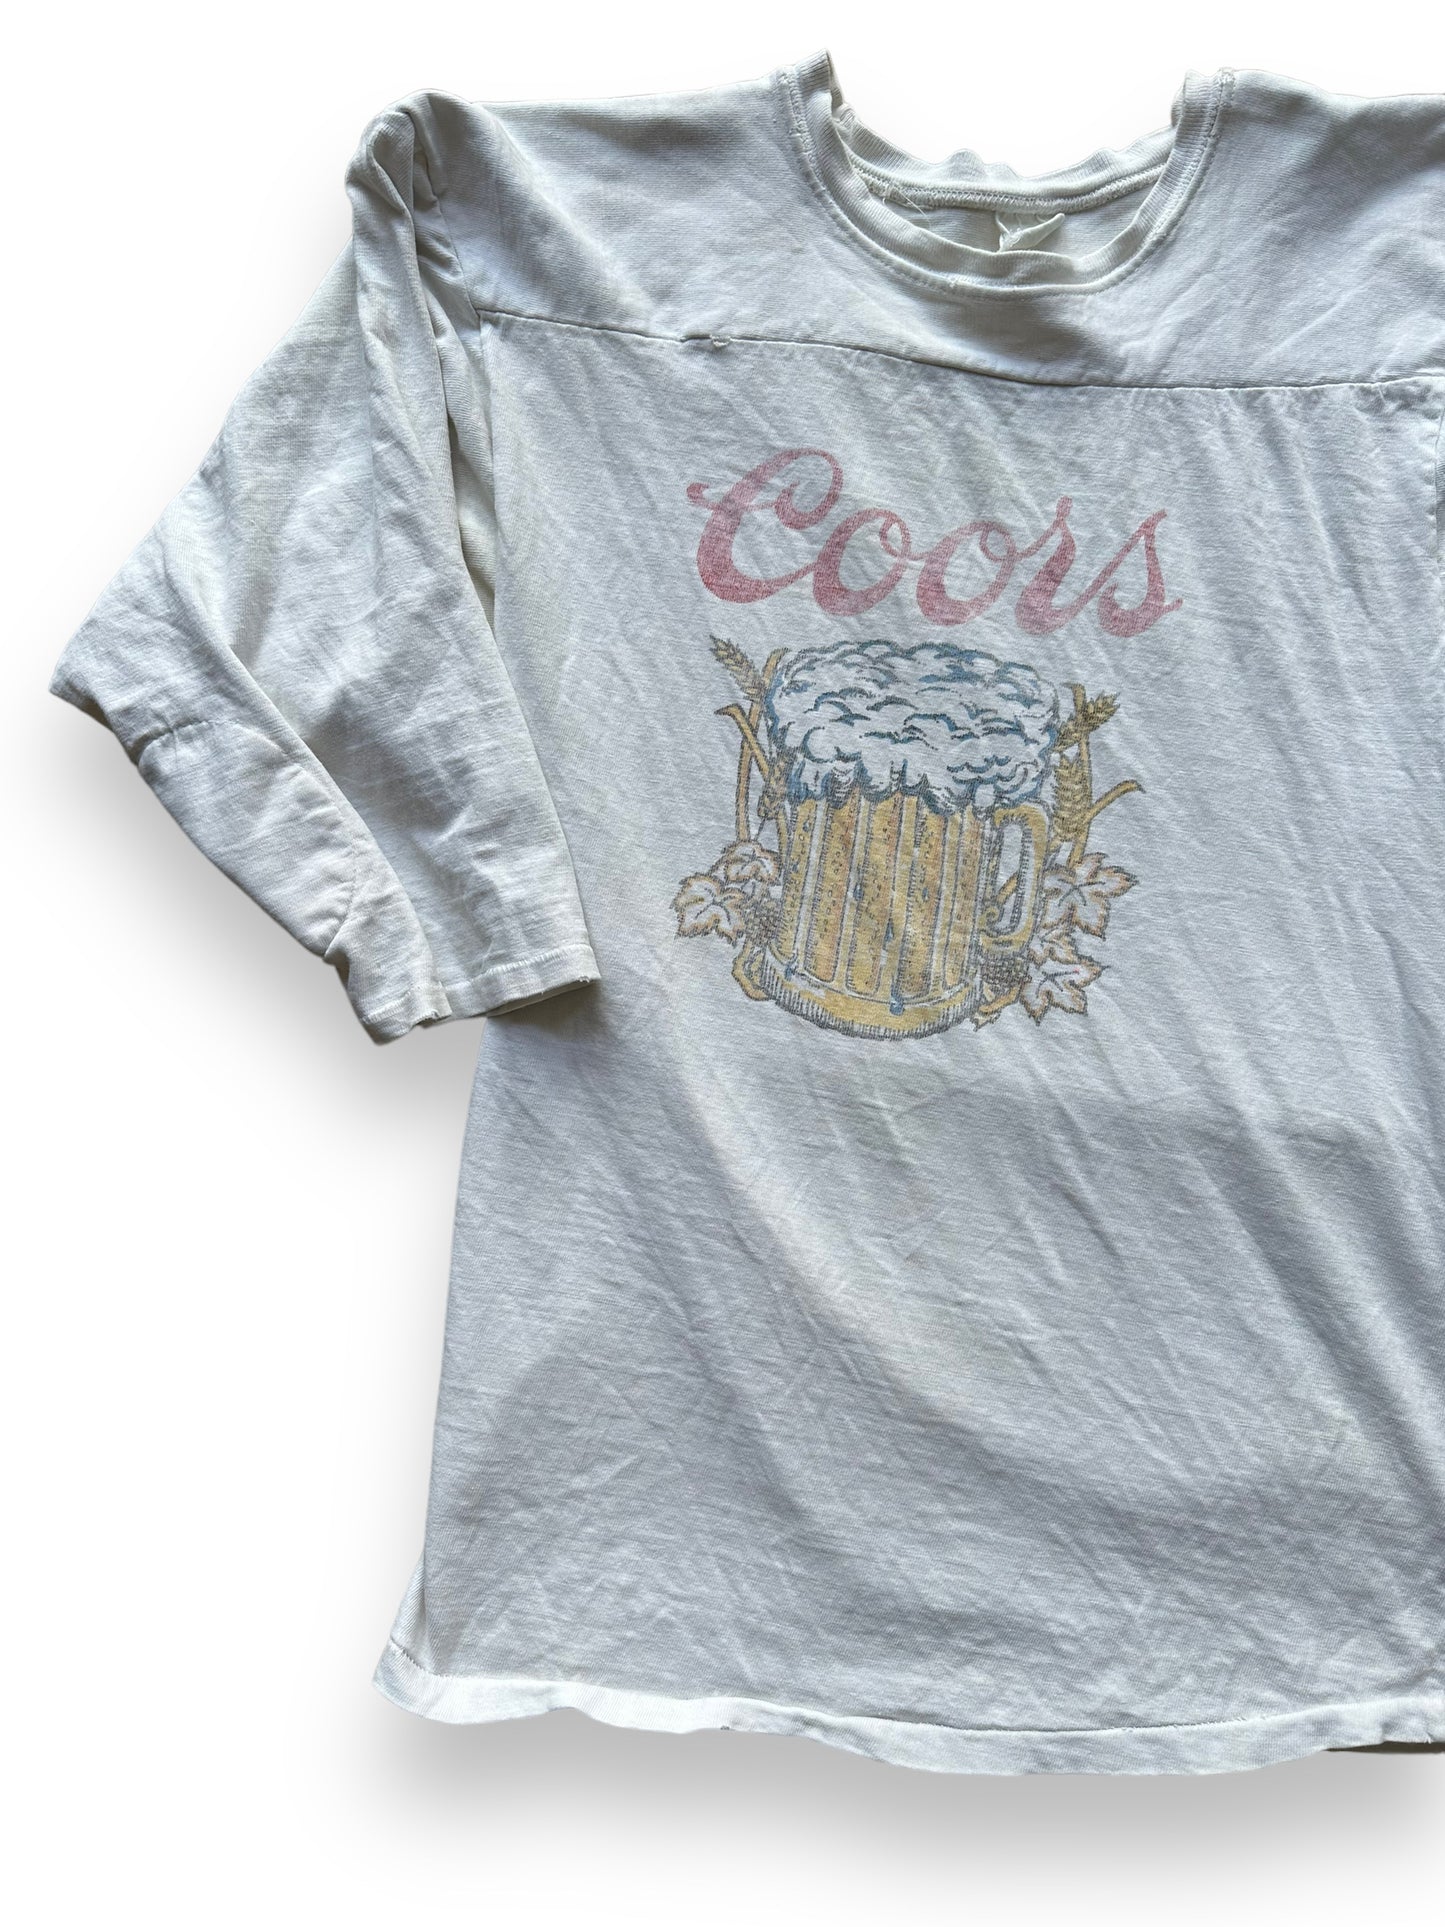 Front Right View of Vintage Coors Jersey Tee SZ M | Vintage Beer T-Shirts Seattle | Barn Owl Vintage Tees Seattle